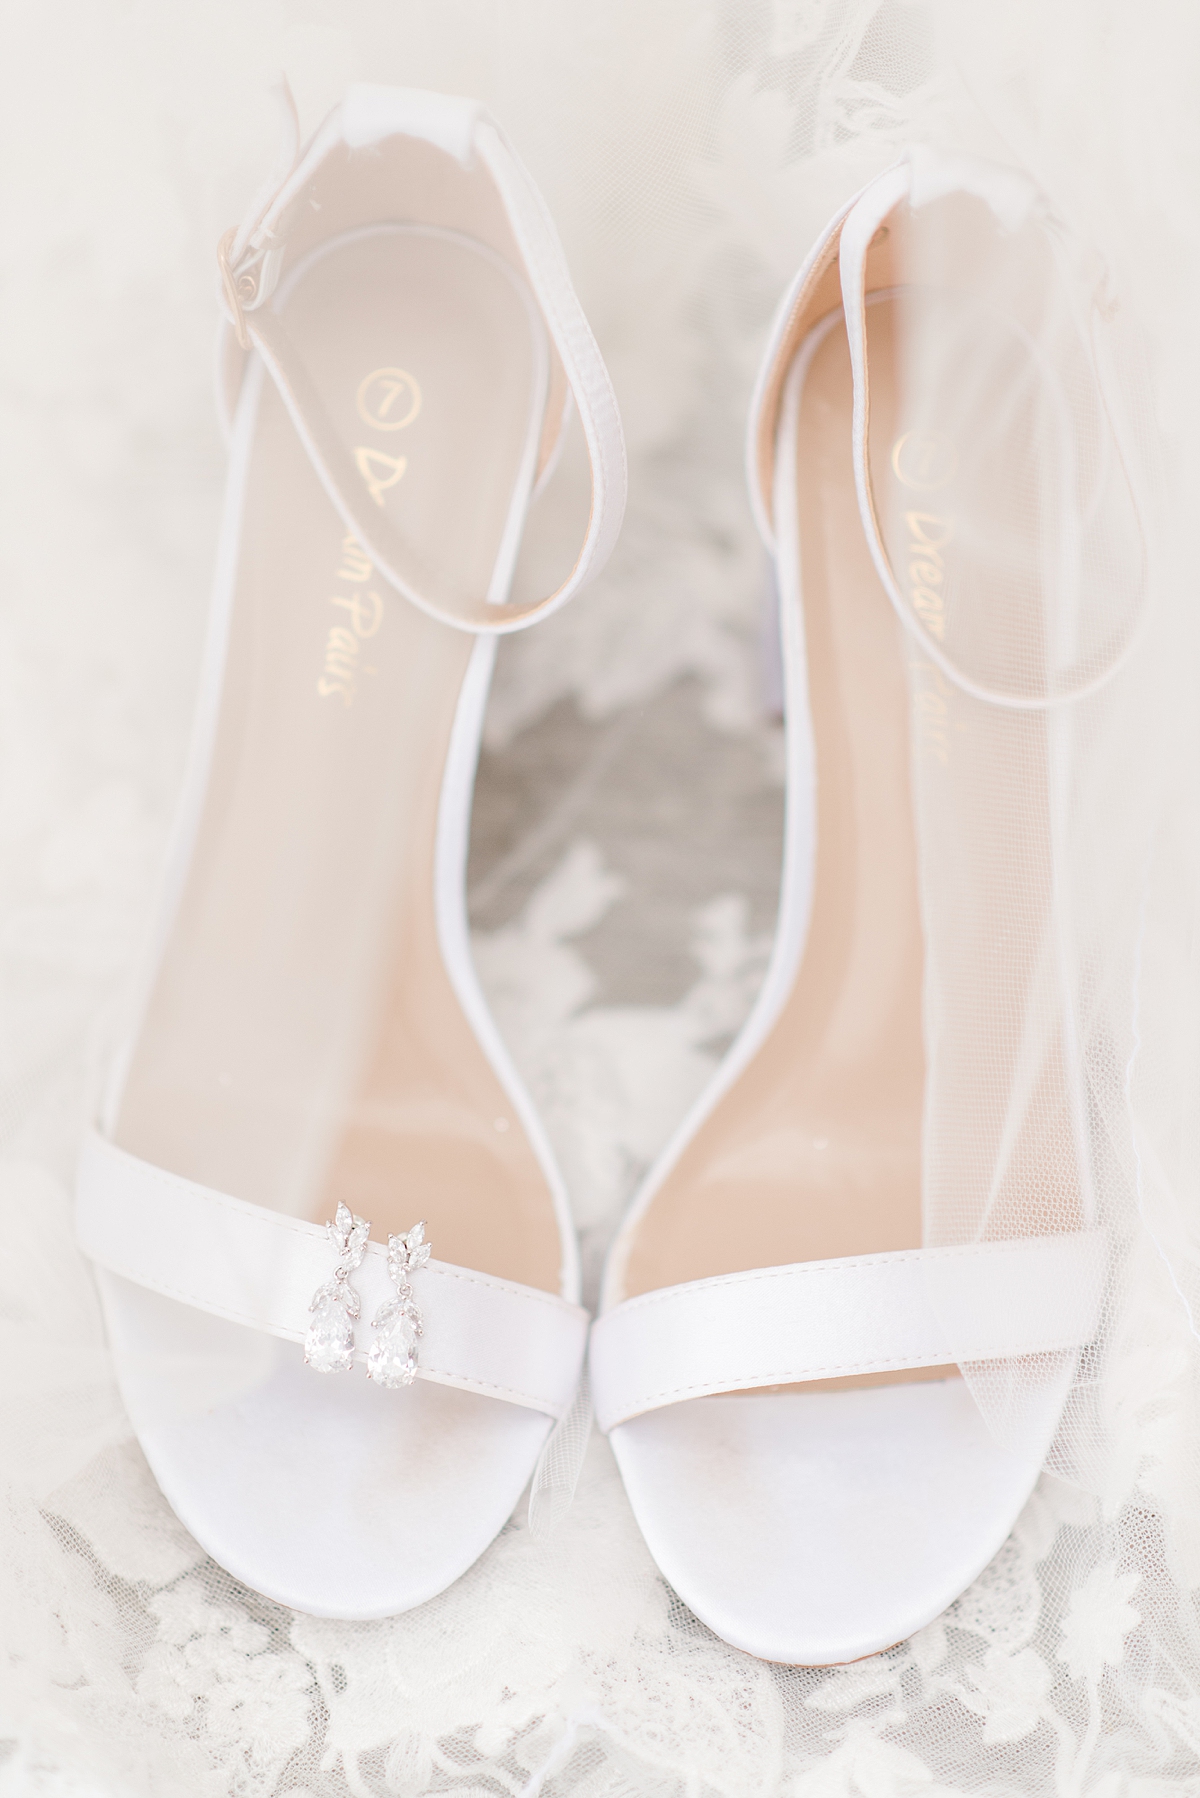 Wedding Shoes and Rings Bridal Details at Grace Estate Winery Summer Wedding. Wedding Photography by Richmond Wedding Photographer Kailey Brianne Photography. 